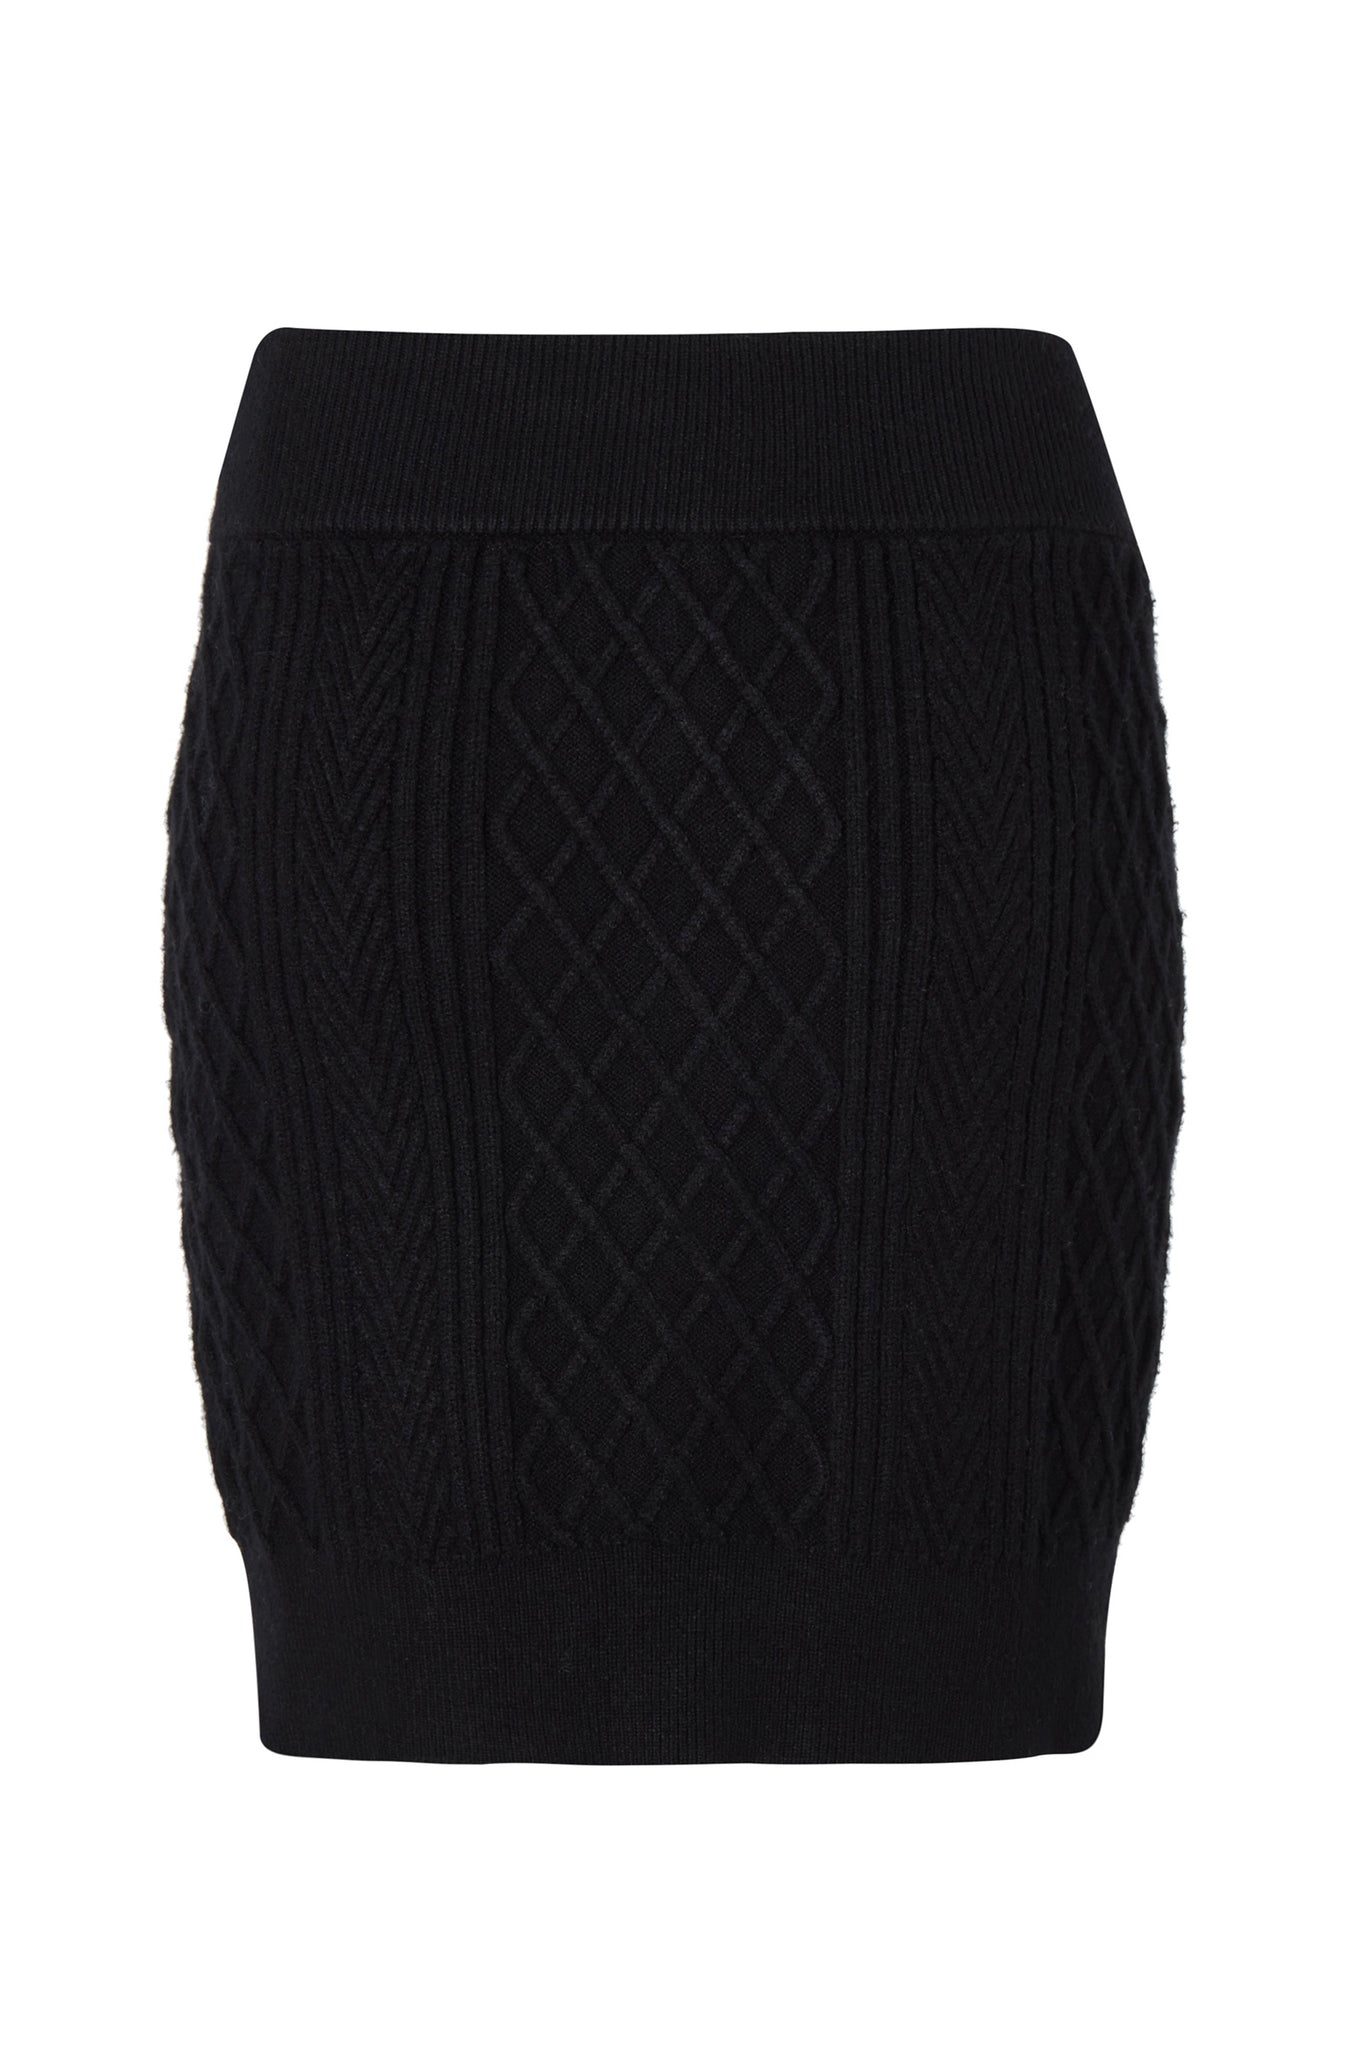 back of womens cable knit mini skirt with two welt pockets on each hip with gold button fastenings and gold button detailing down the centre front